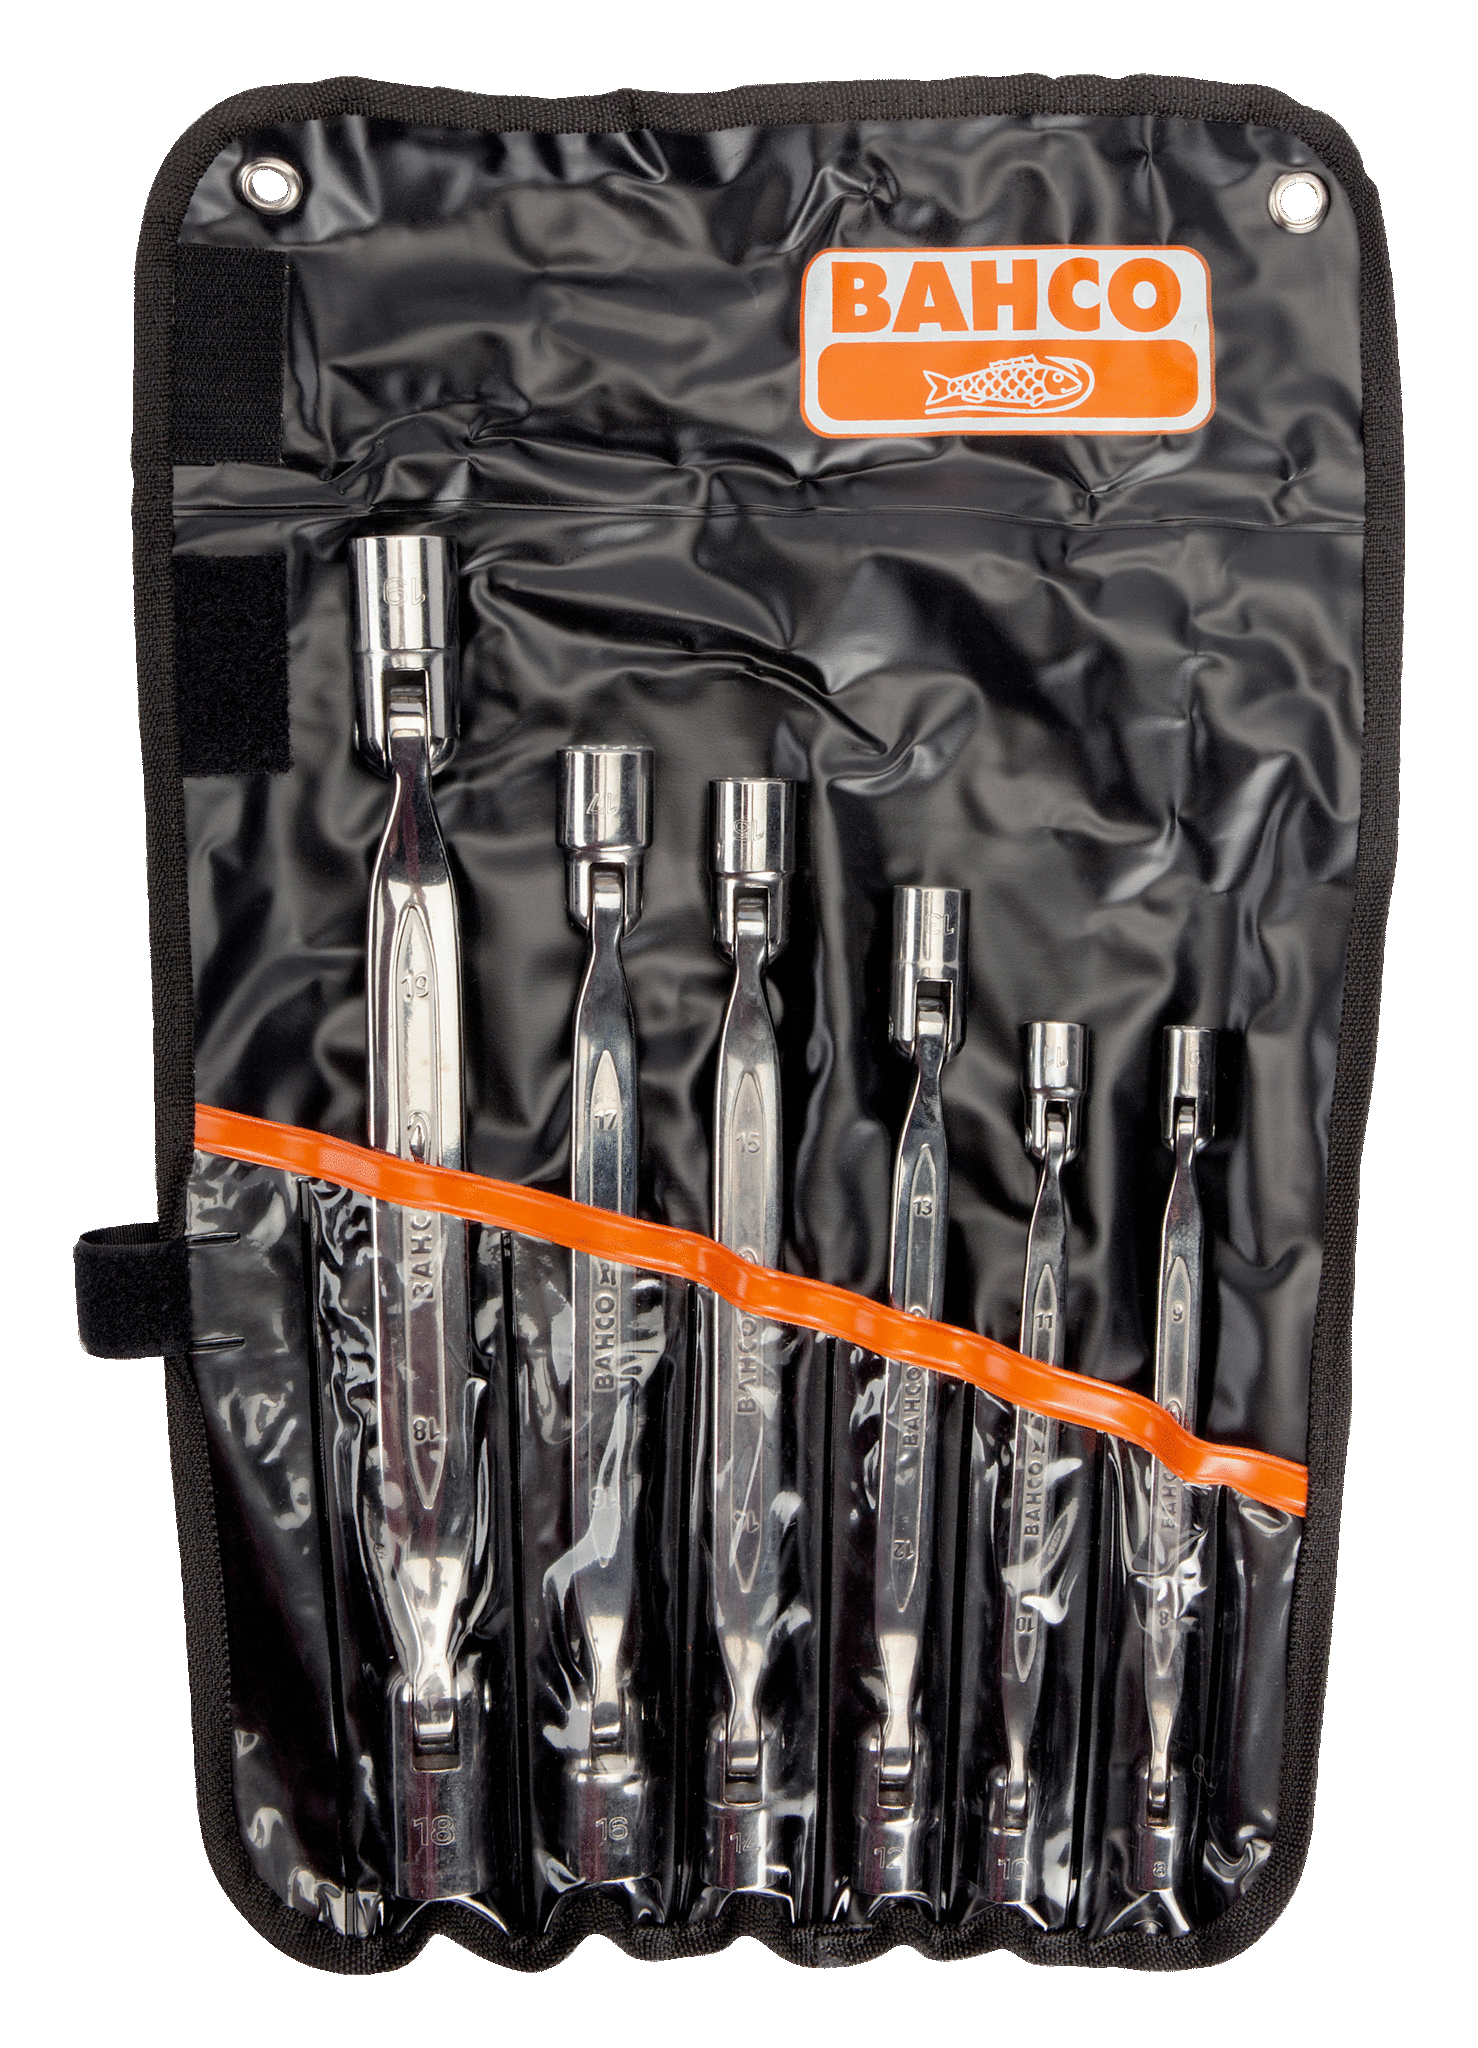 BAHCO 4040M/6T Metric Double Ended Swivel Head Socket Wrench Set - Premium Socket Wrench Set from BAHCO - Shop now at Yew Aik.